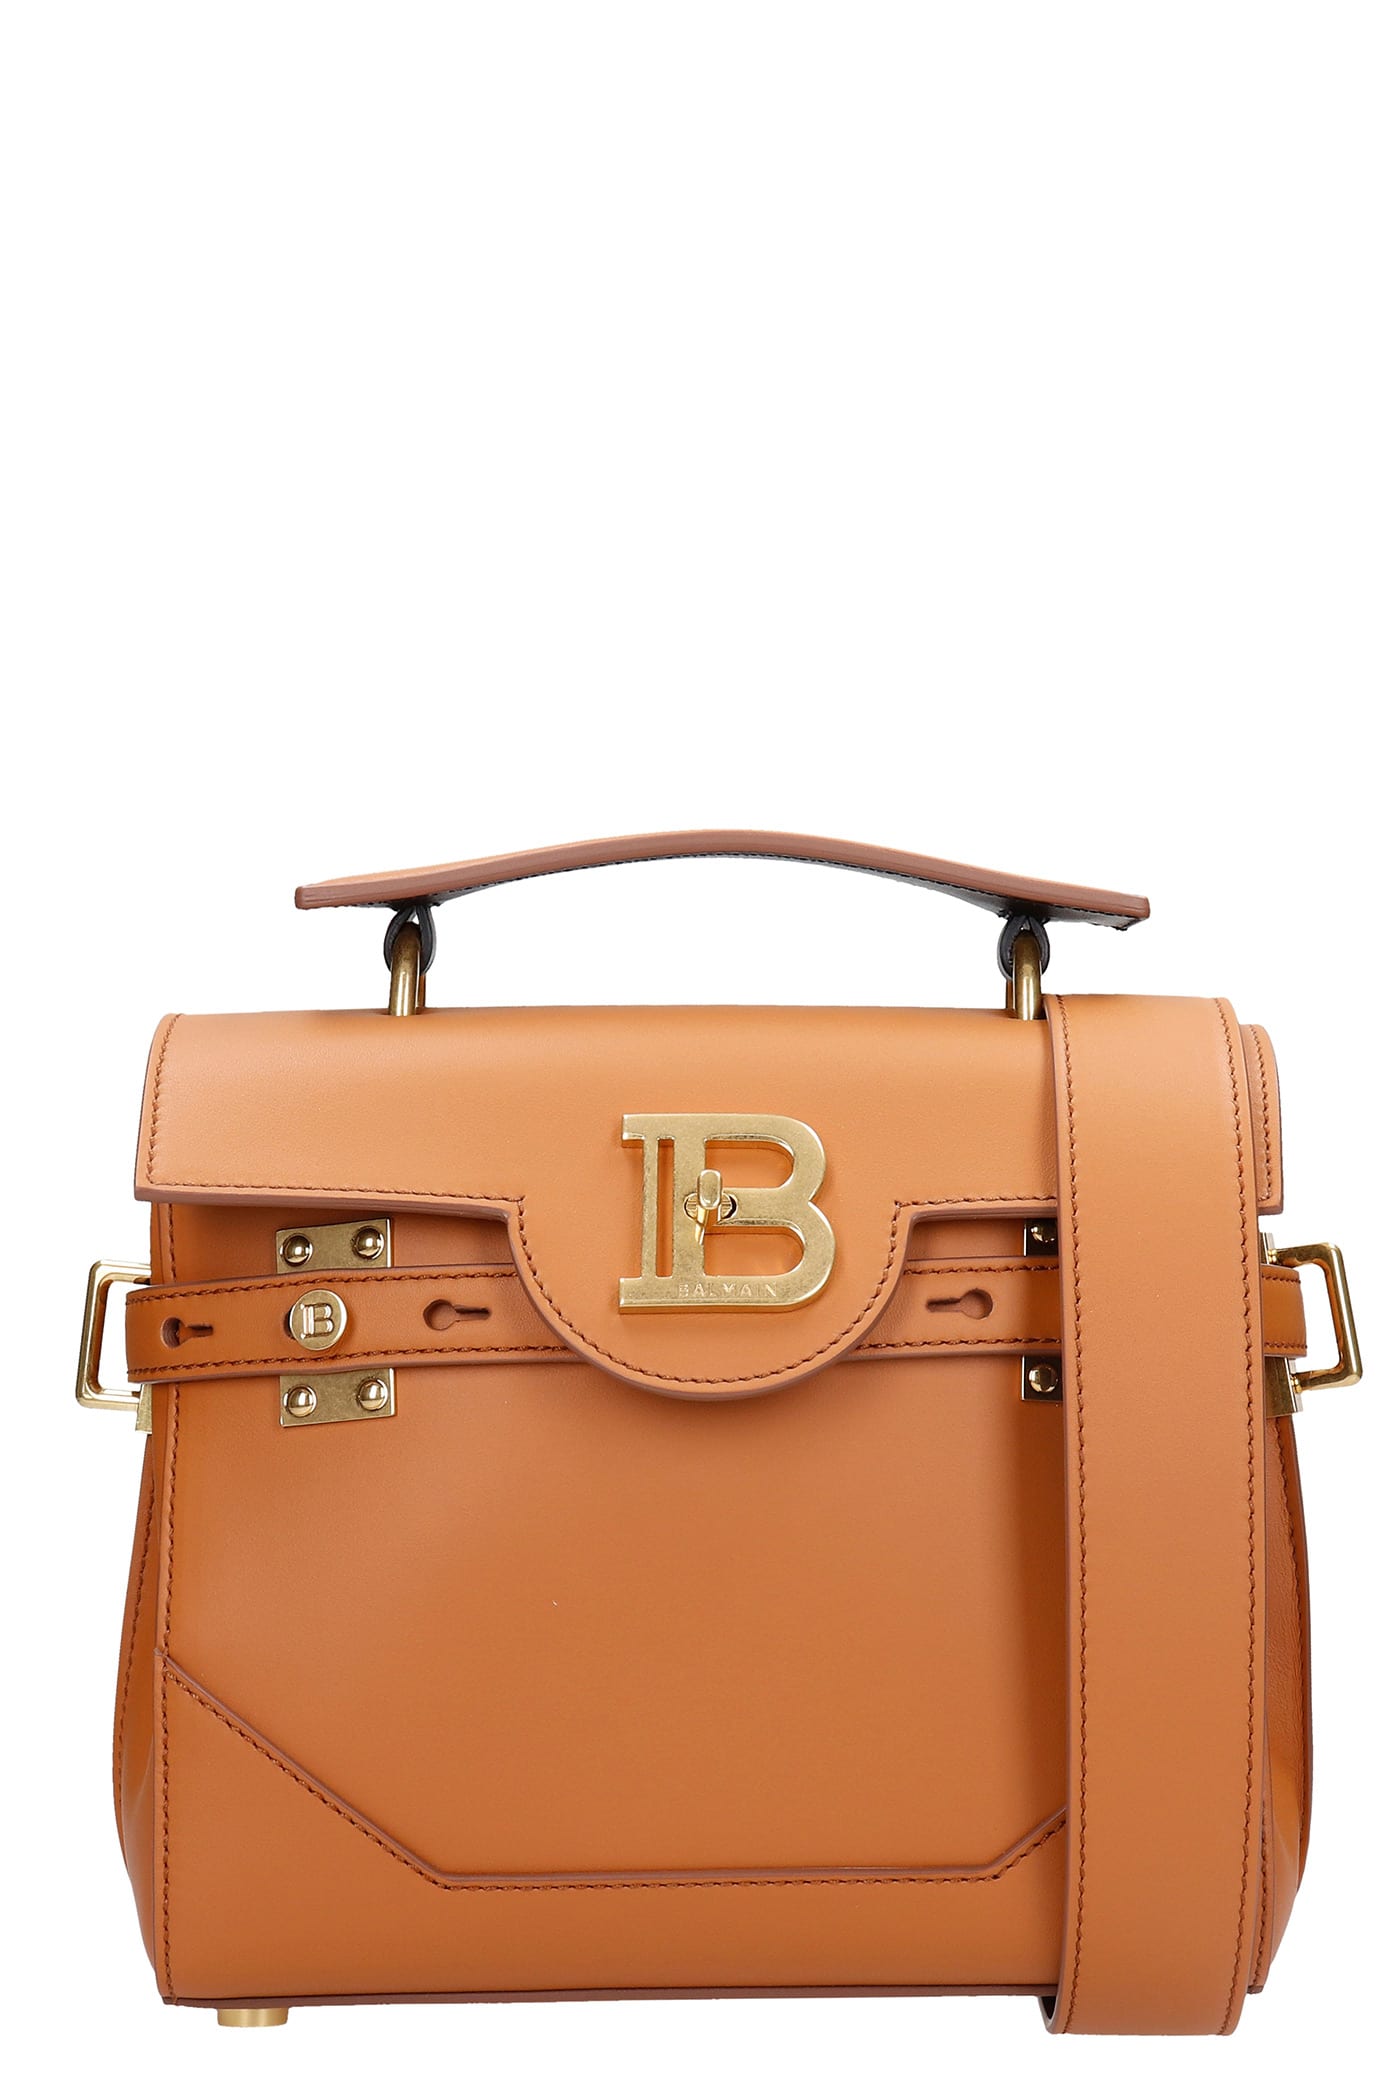 Balmain Hand Bag In Leather Colour Leather